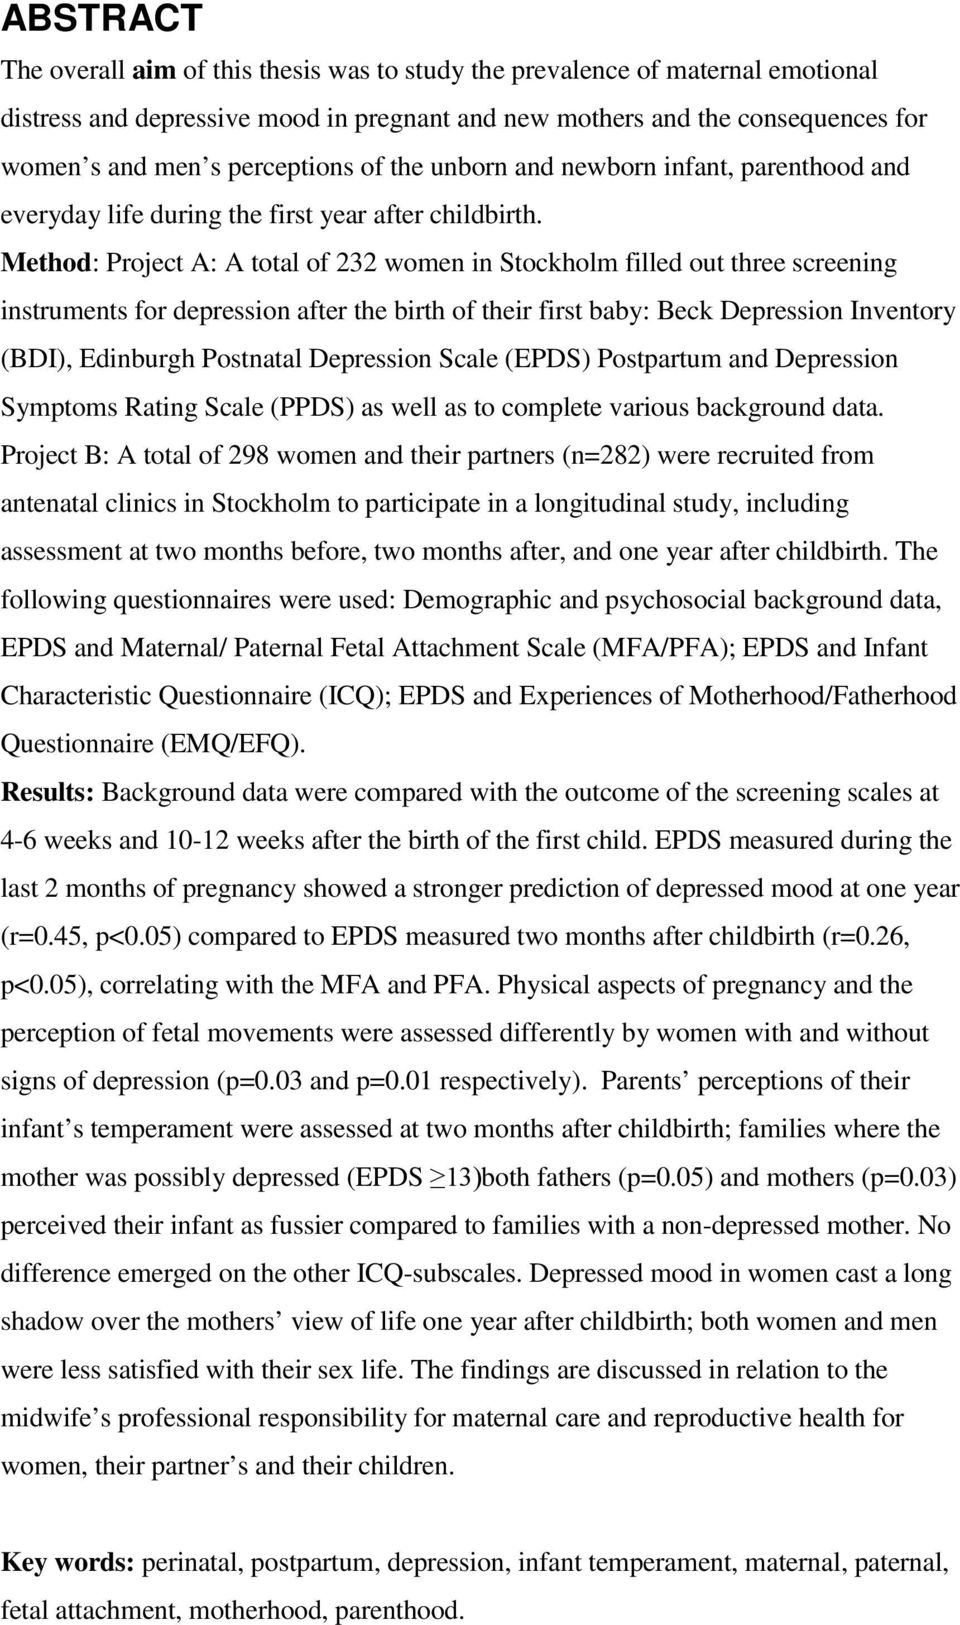 Method: Project A: A total of 232 women in Stockholm filled out three screening instruments for depression after the birth of their first baby: Beck Depression Inventory (BDI), Edinburgh Postnatal